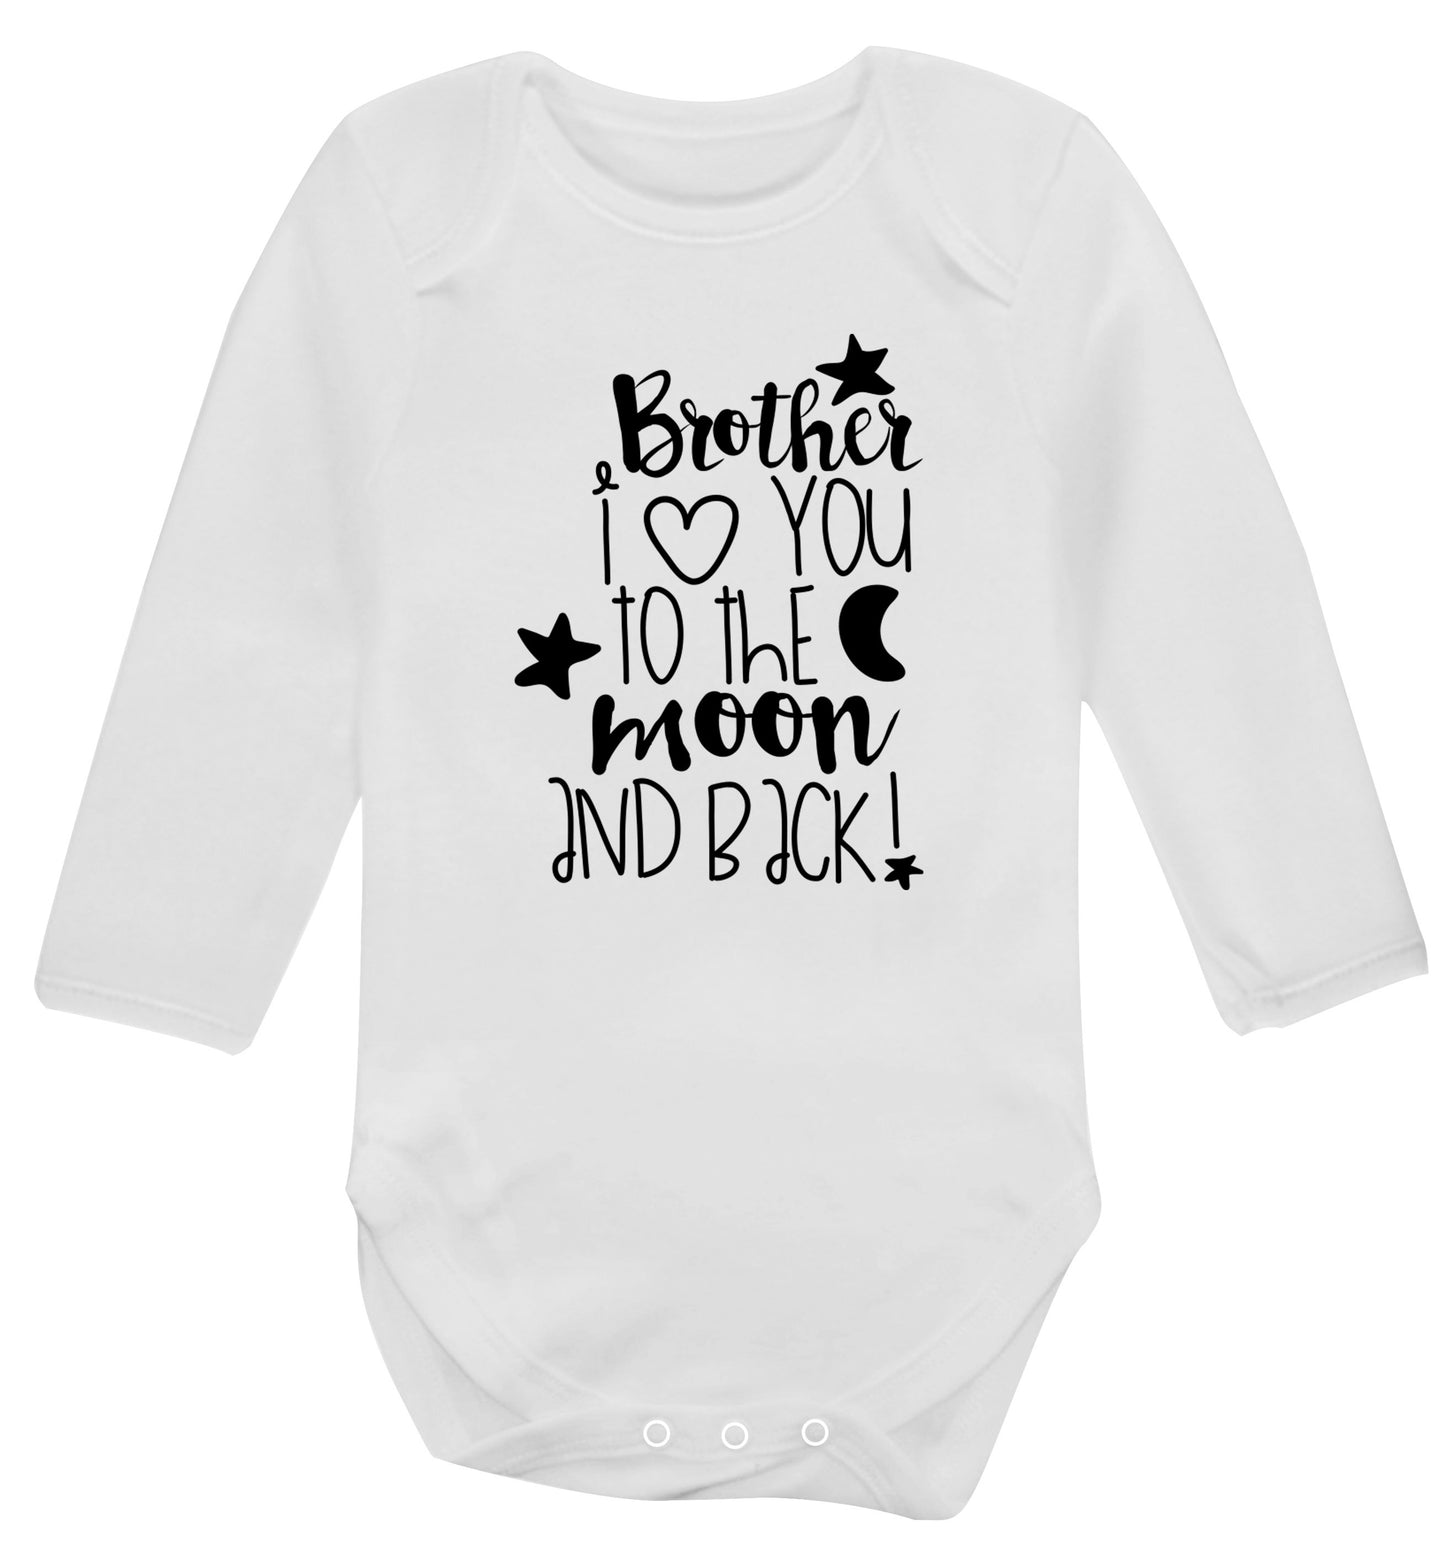 Brother I love you to the moon and back Baby Vest long sleeved white 6-12 months